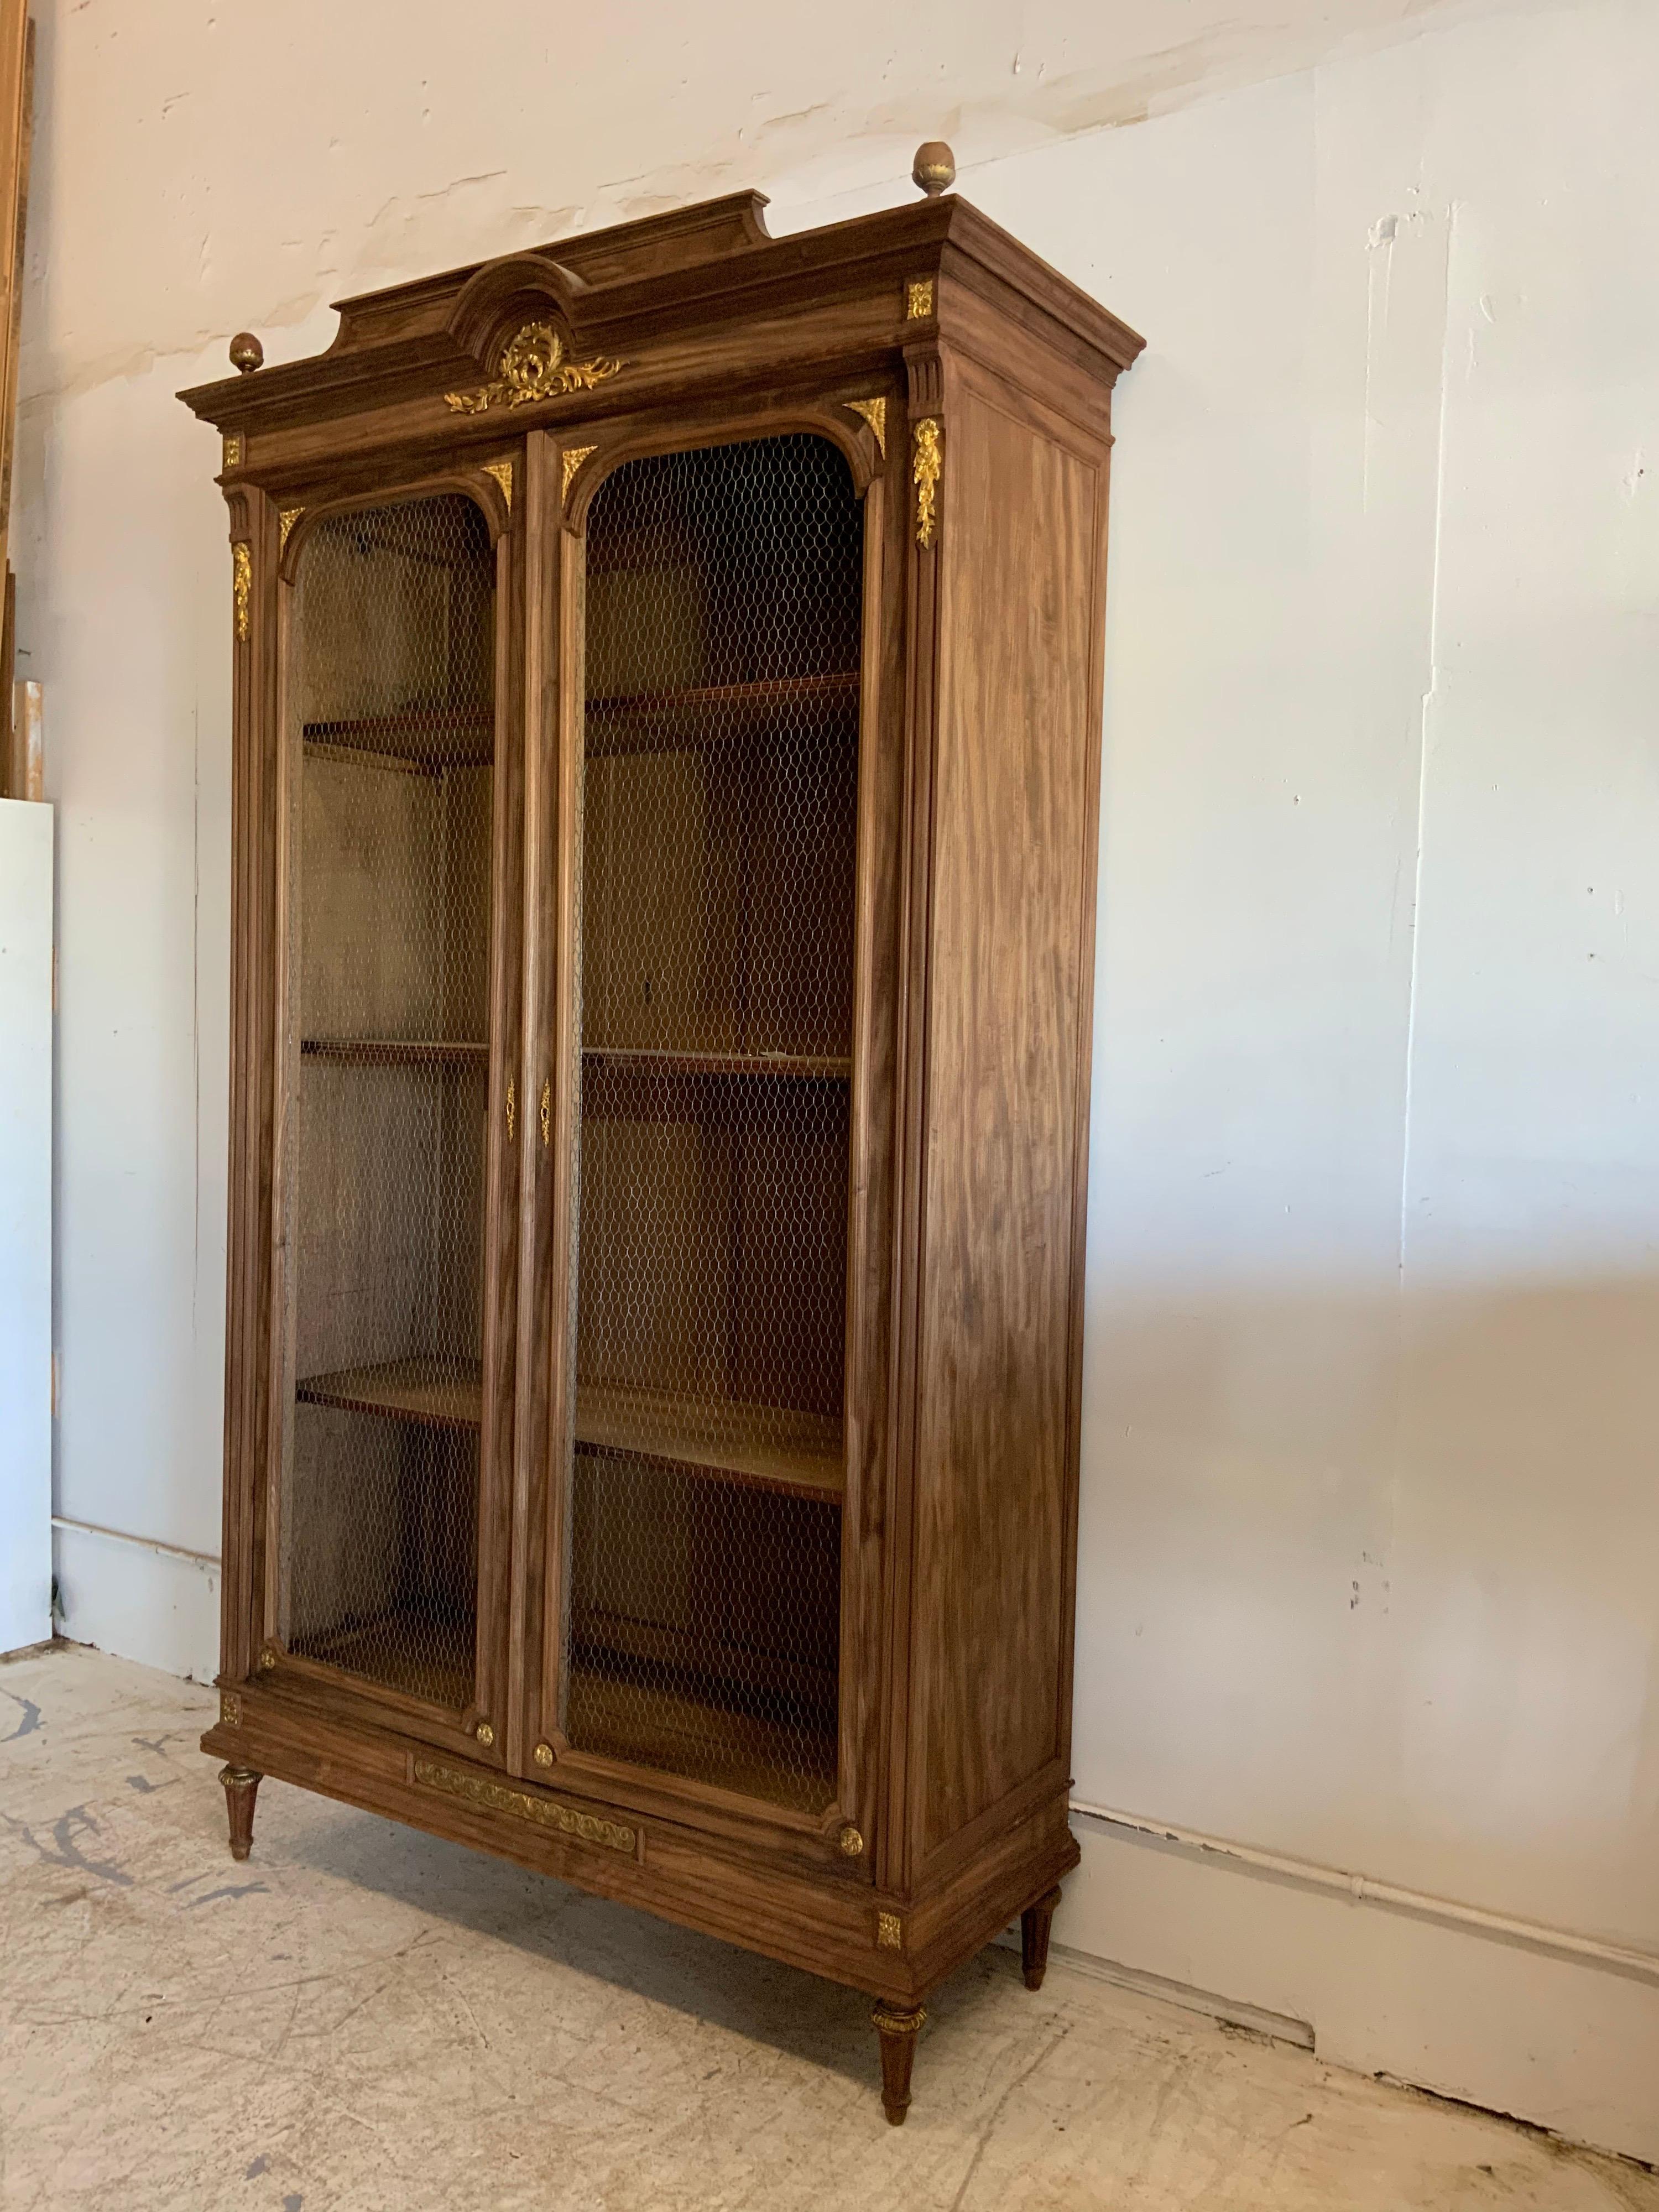 Armoir Empire Louis XVI 1900-1920 bleached, in walnut. Doors with chicken wire and adjustable shelves.